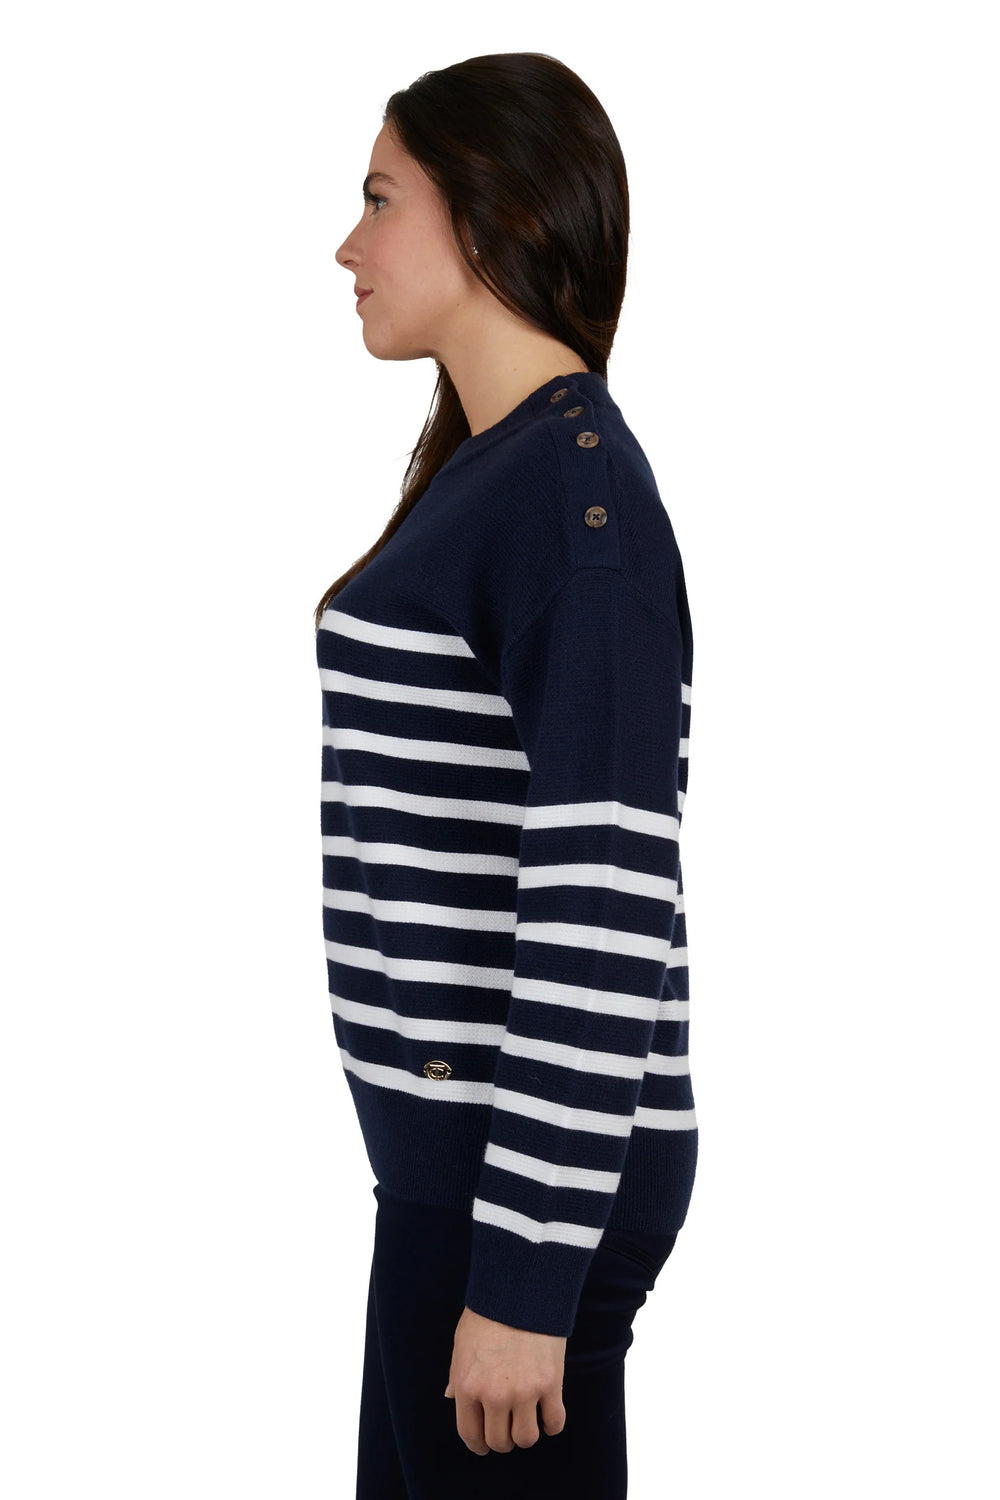 Thomas Cook - Womens Colette Navy Jumper